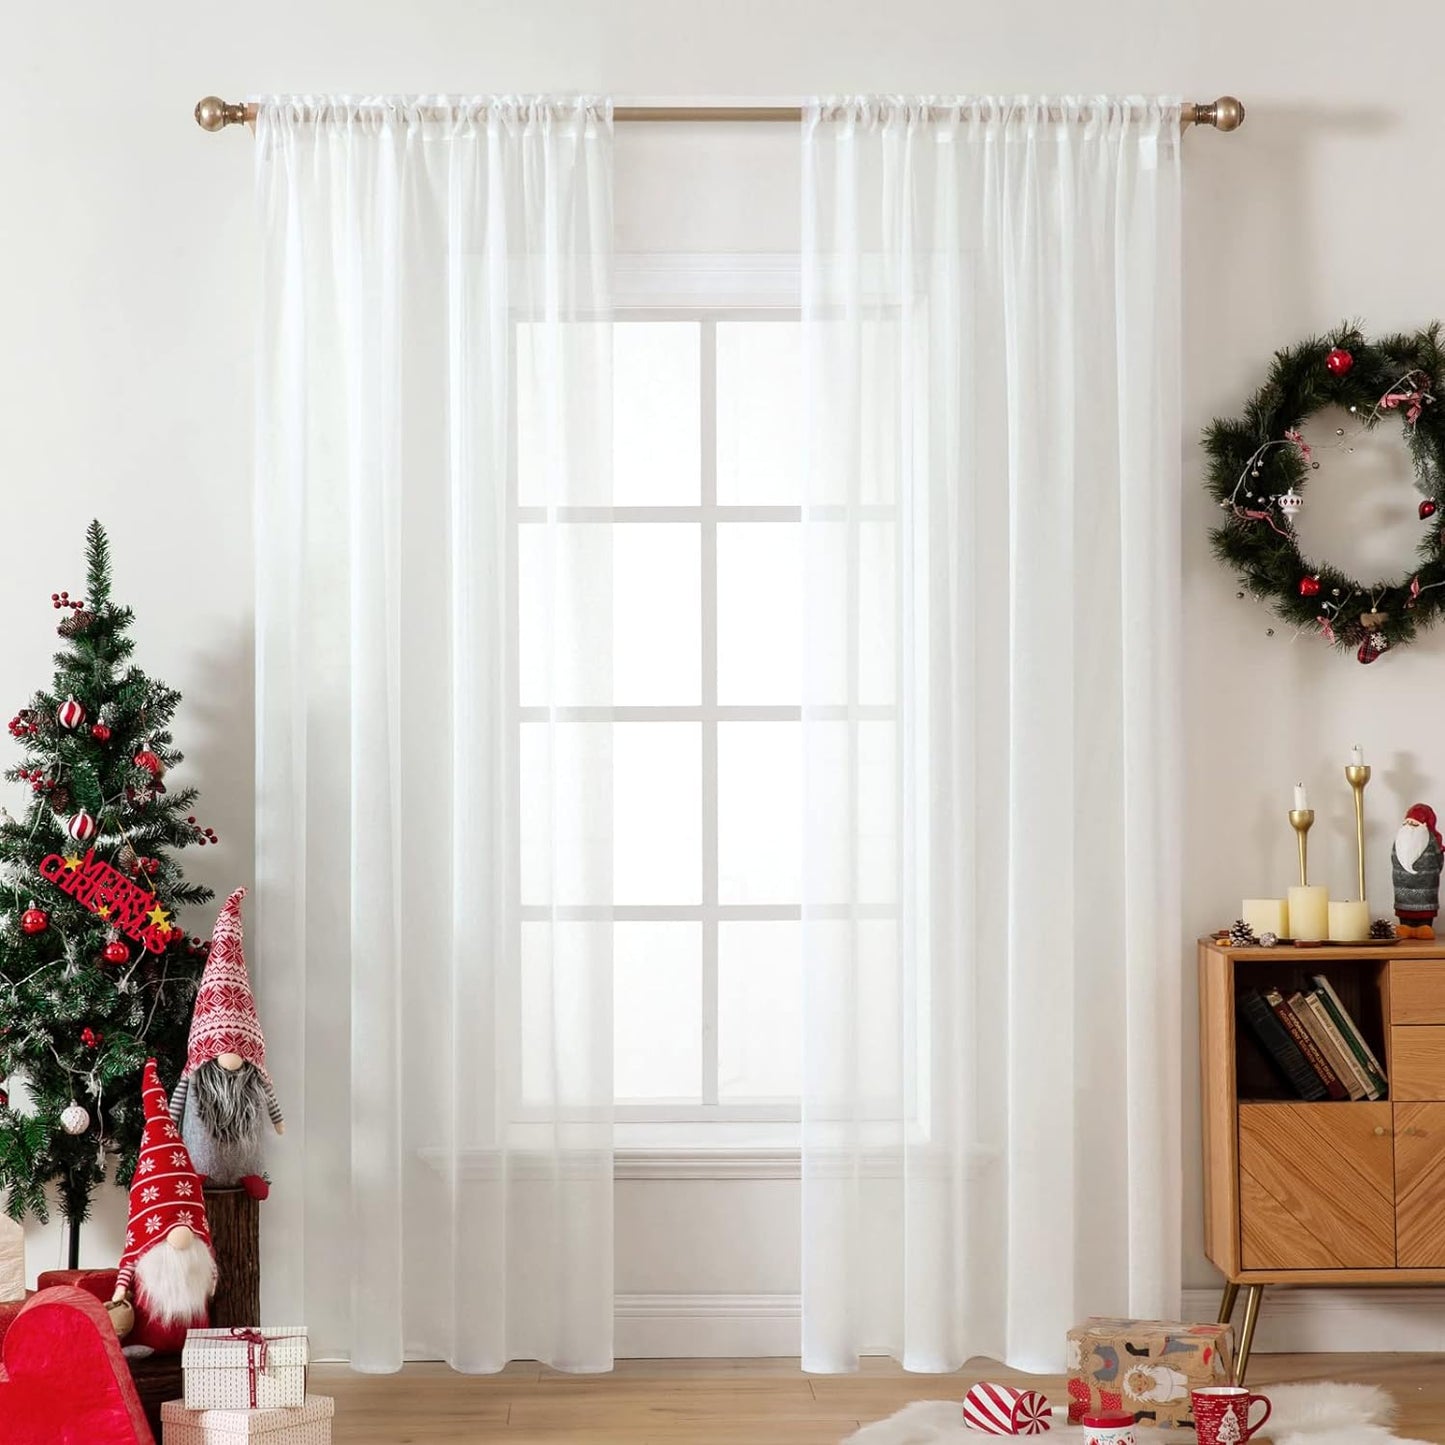 MIULEE White Sheer Curtains 96 Inches Long Window Curtains 2 Panels Solid Color Elegant Window Voile Panels/Drapes/Treatment for Bedroom Living Room (54 X 96 Inches White)  MIULEE Ivory 38''W X 72''L 